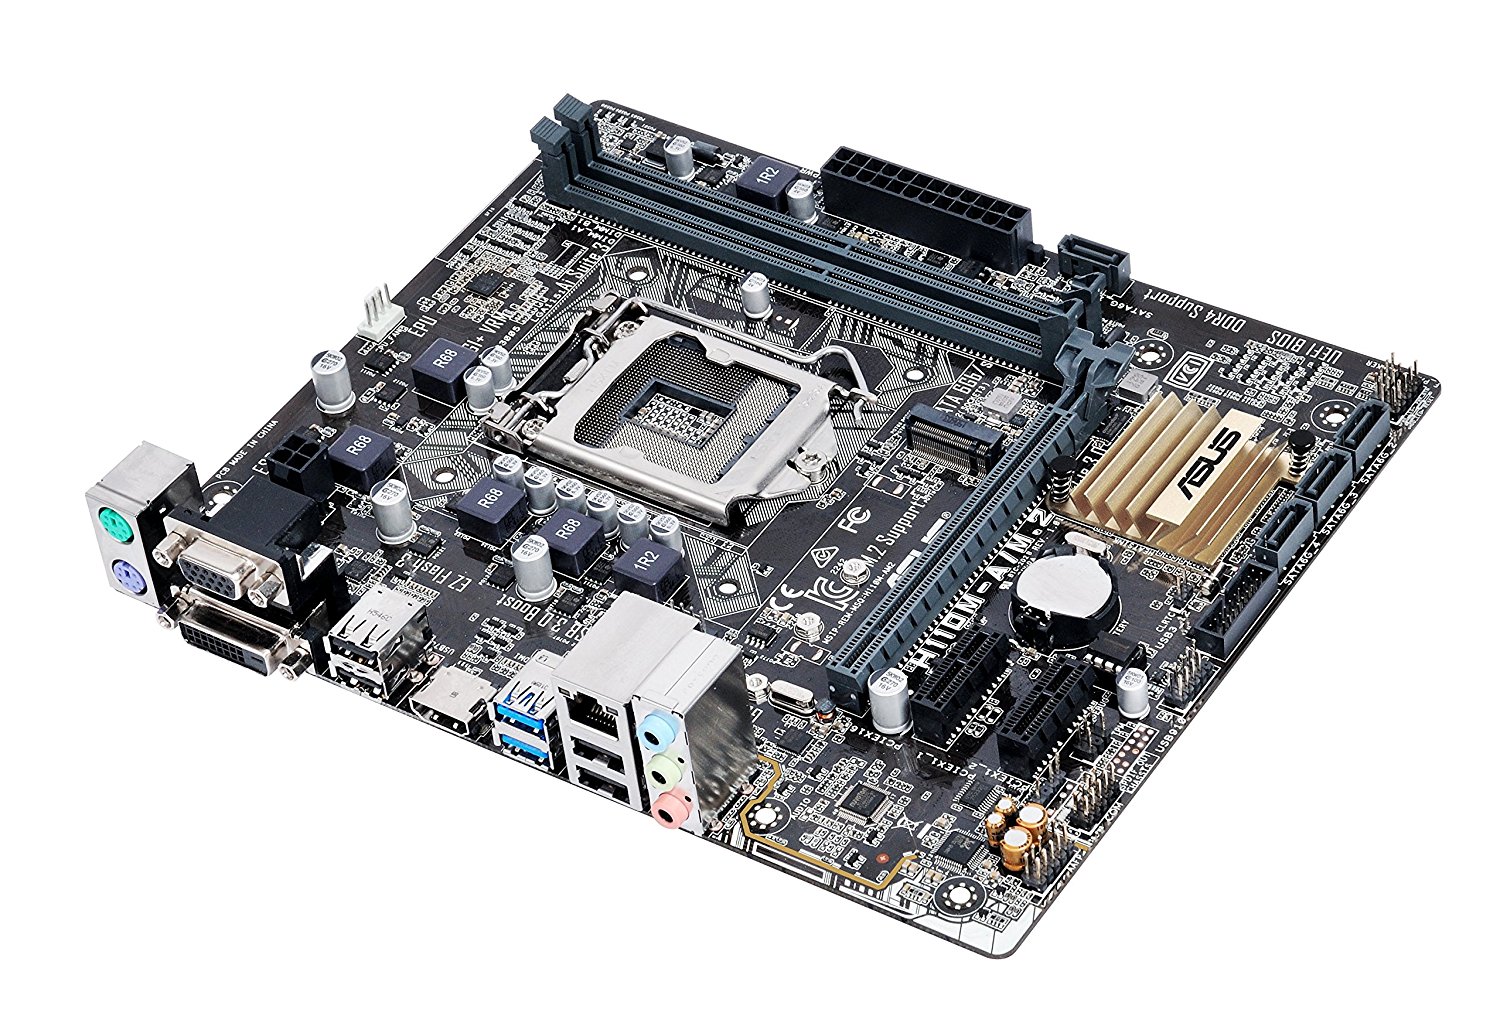 Asus H110M-A/M.2 Motherboard - H110M-A/M.2 - image 2 of 6